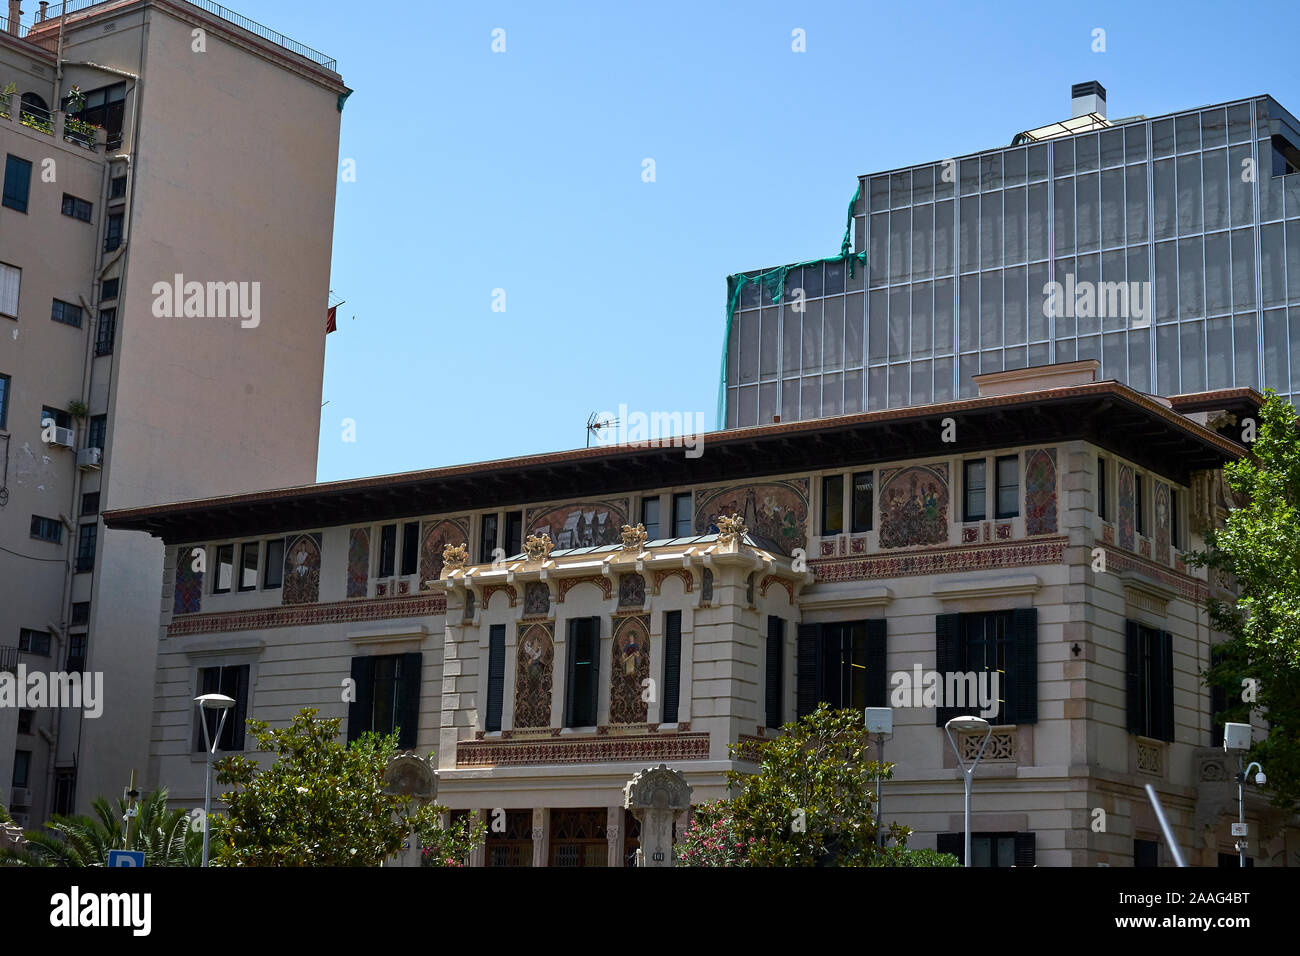 The Palau Ramon Montaner on the Carrer de Roger de Llúria in Barcelona with facade painting and green shutters Stock Photo